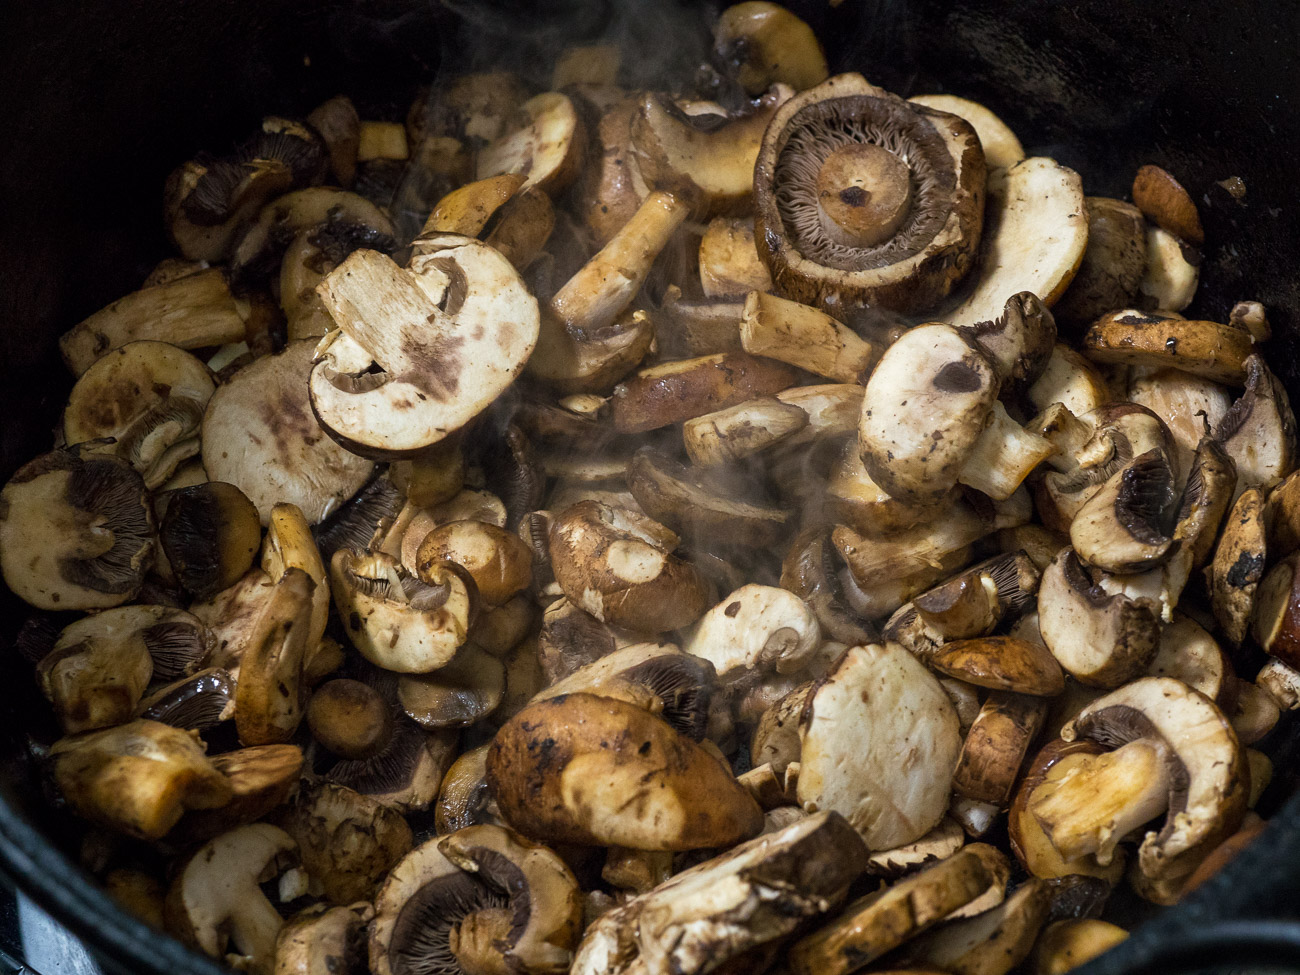 Melt half of the butter in a pan over medium-high heat. Add mushrooms and cook until about 10-15 minutes, or until all of their liquids have been cooked out.